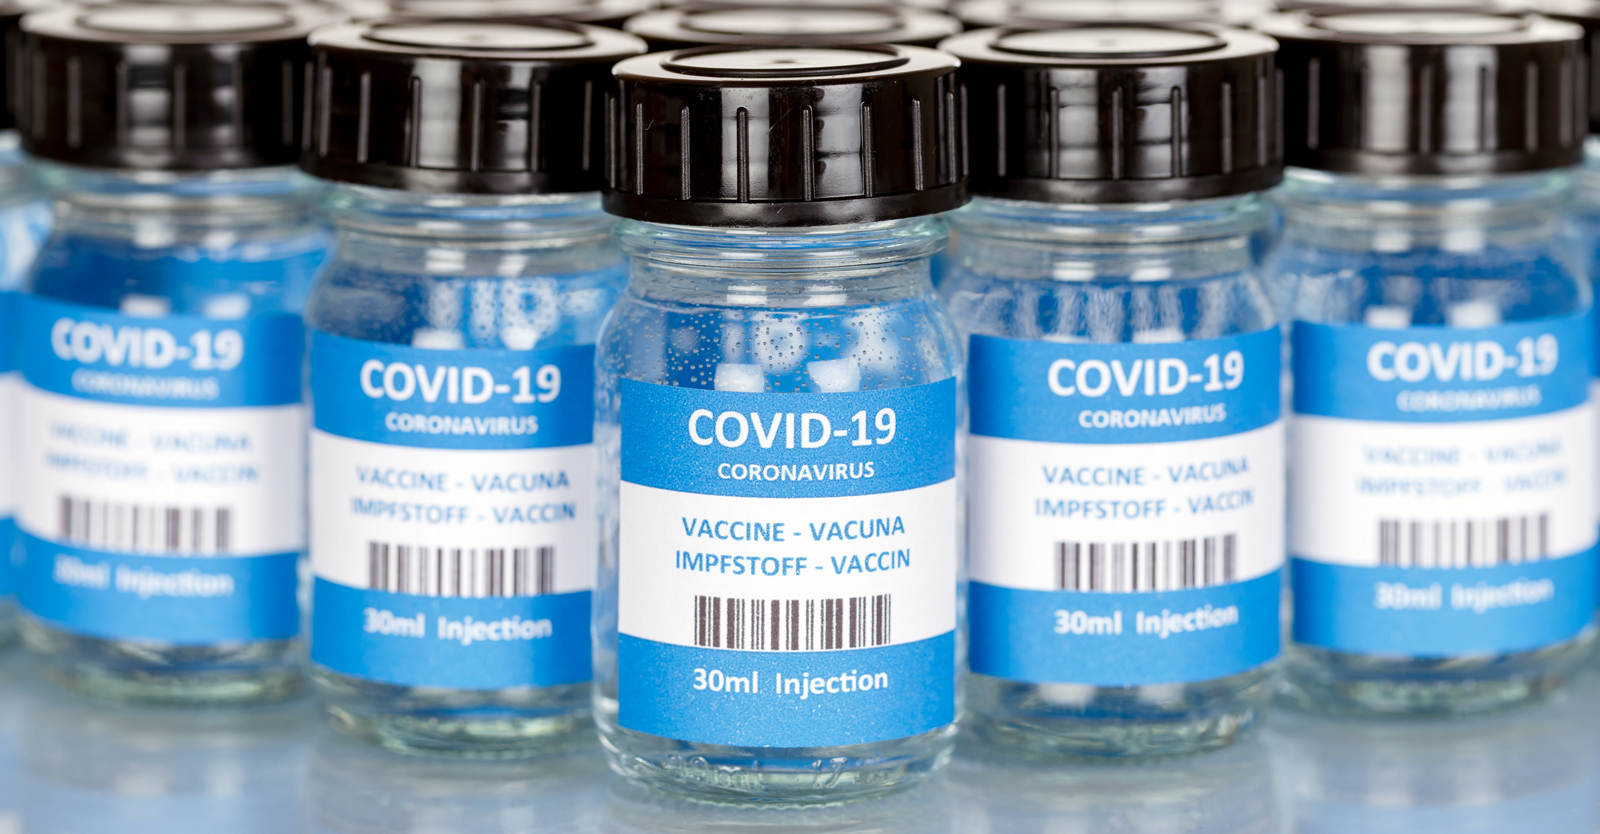 California Man Dies Several Hours After Receiving COVID Vaccine, Cause of Death Unclear  Childrens Health Defense